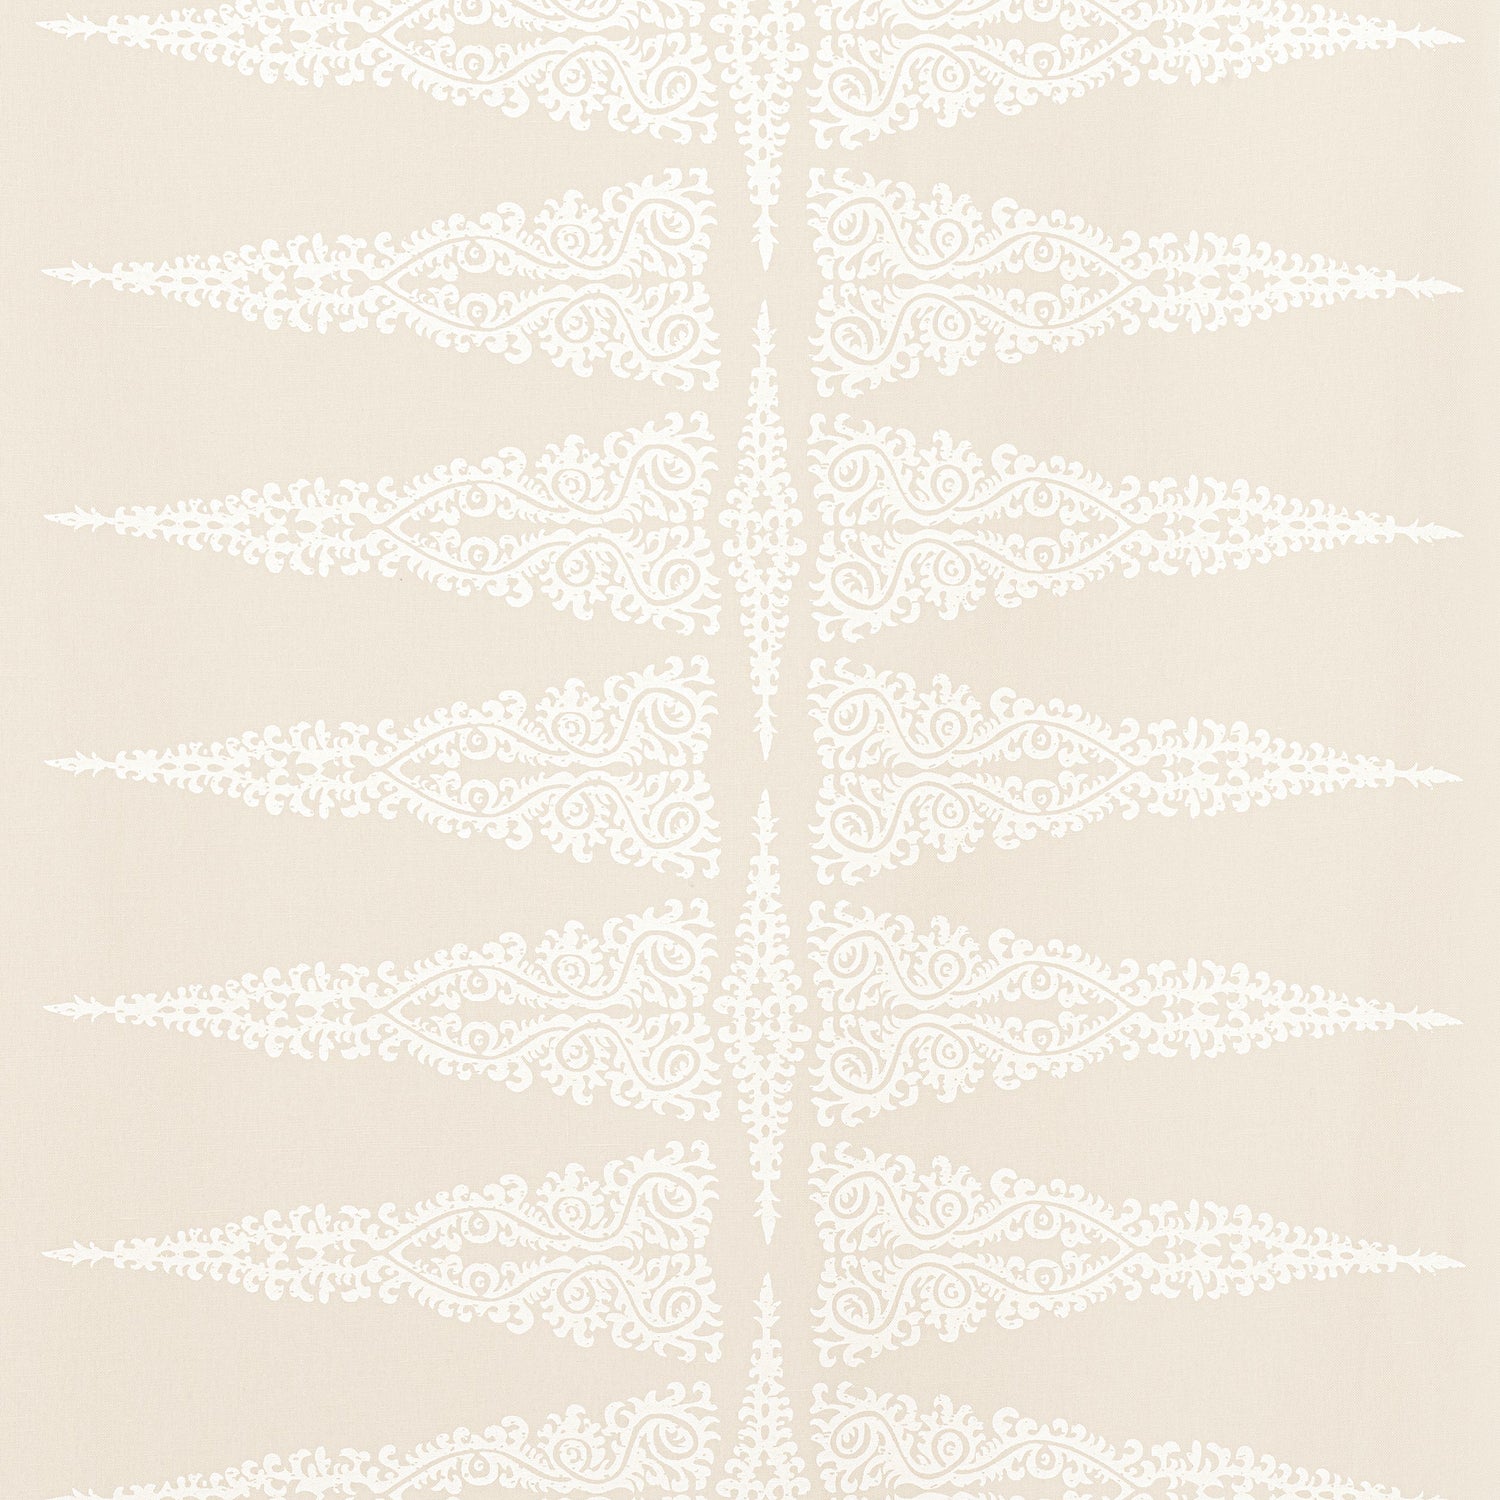 Ellery Stripe fabric in White on Beige color - pattern number AF24541 - by Anna French in the Devon collection